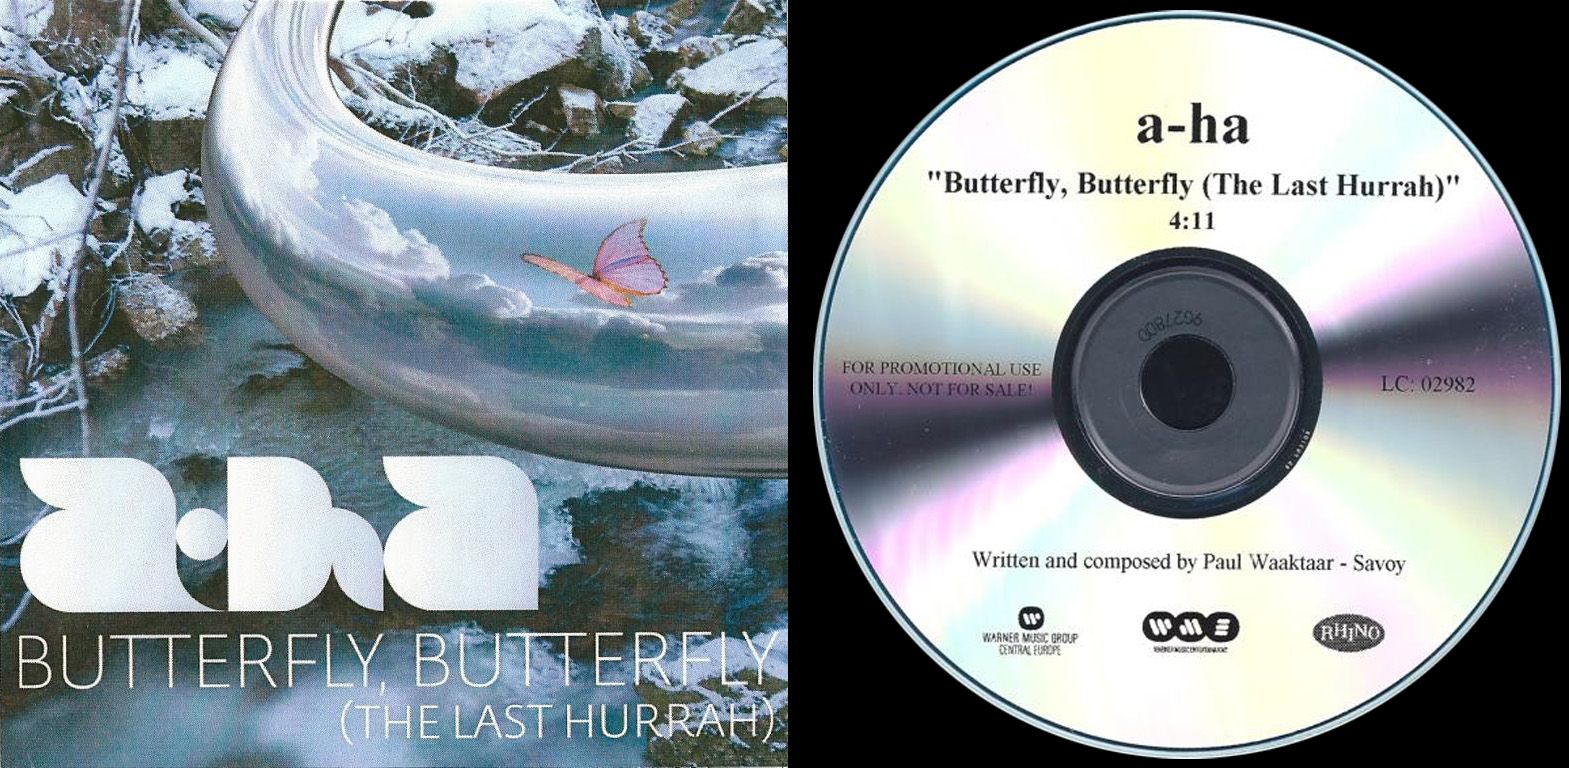 Butterfly German promo CD - click to enlarge